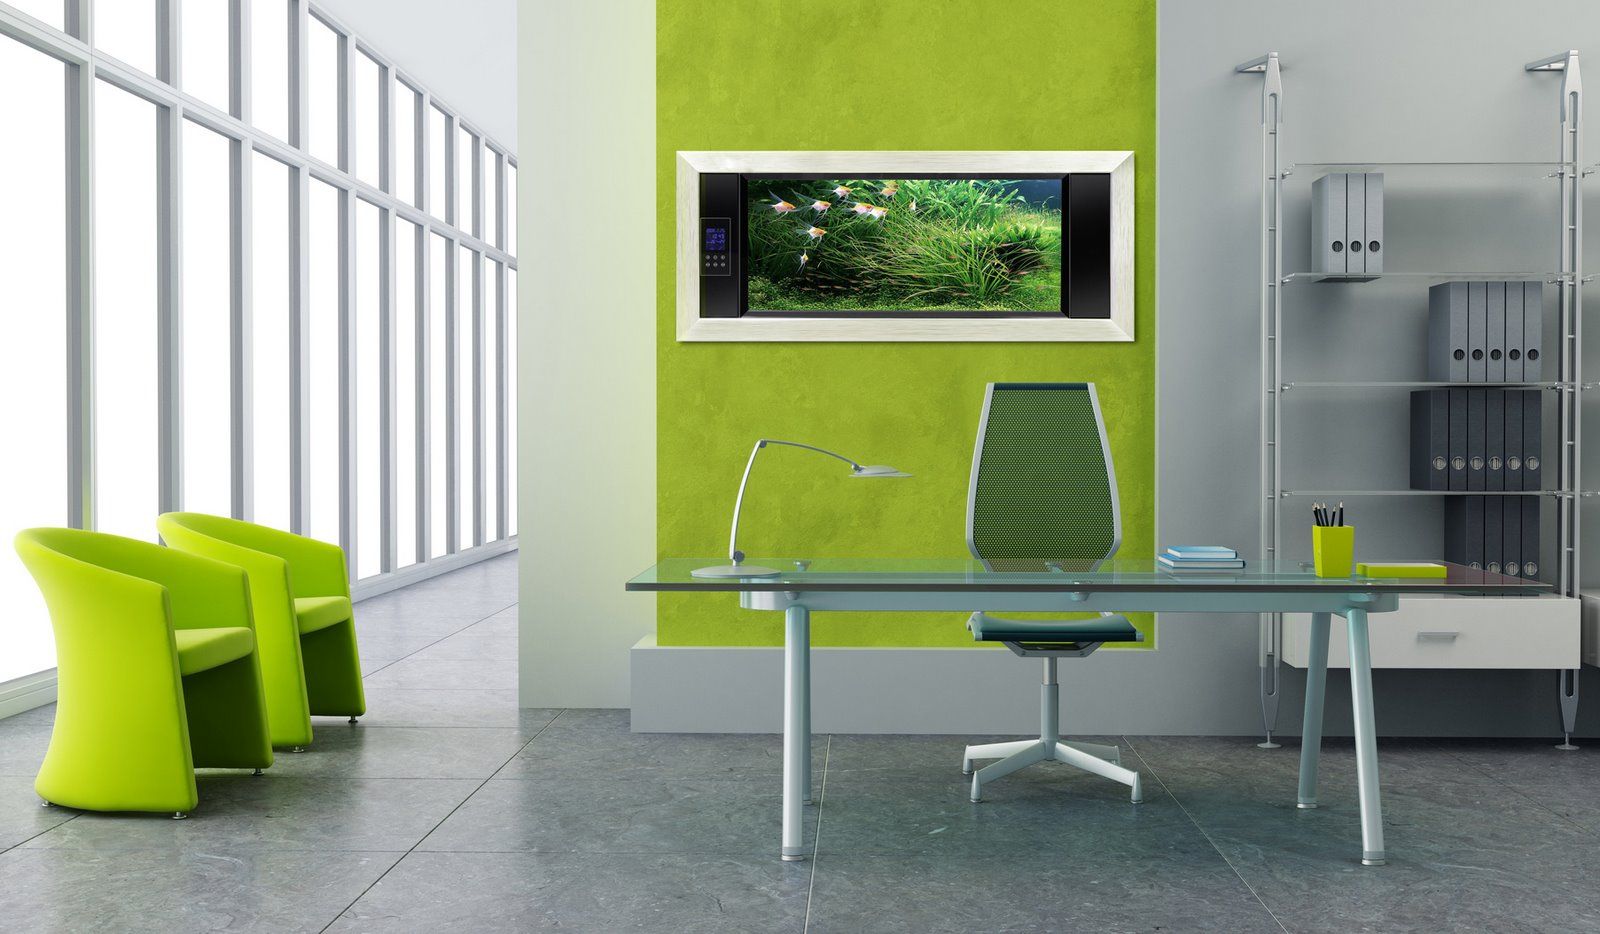 Transform the Look of your Dull Office Space with Exciting Wallpaper Installation. Vancouver, BC